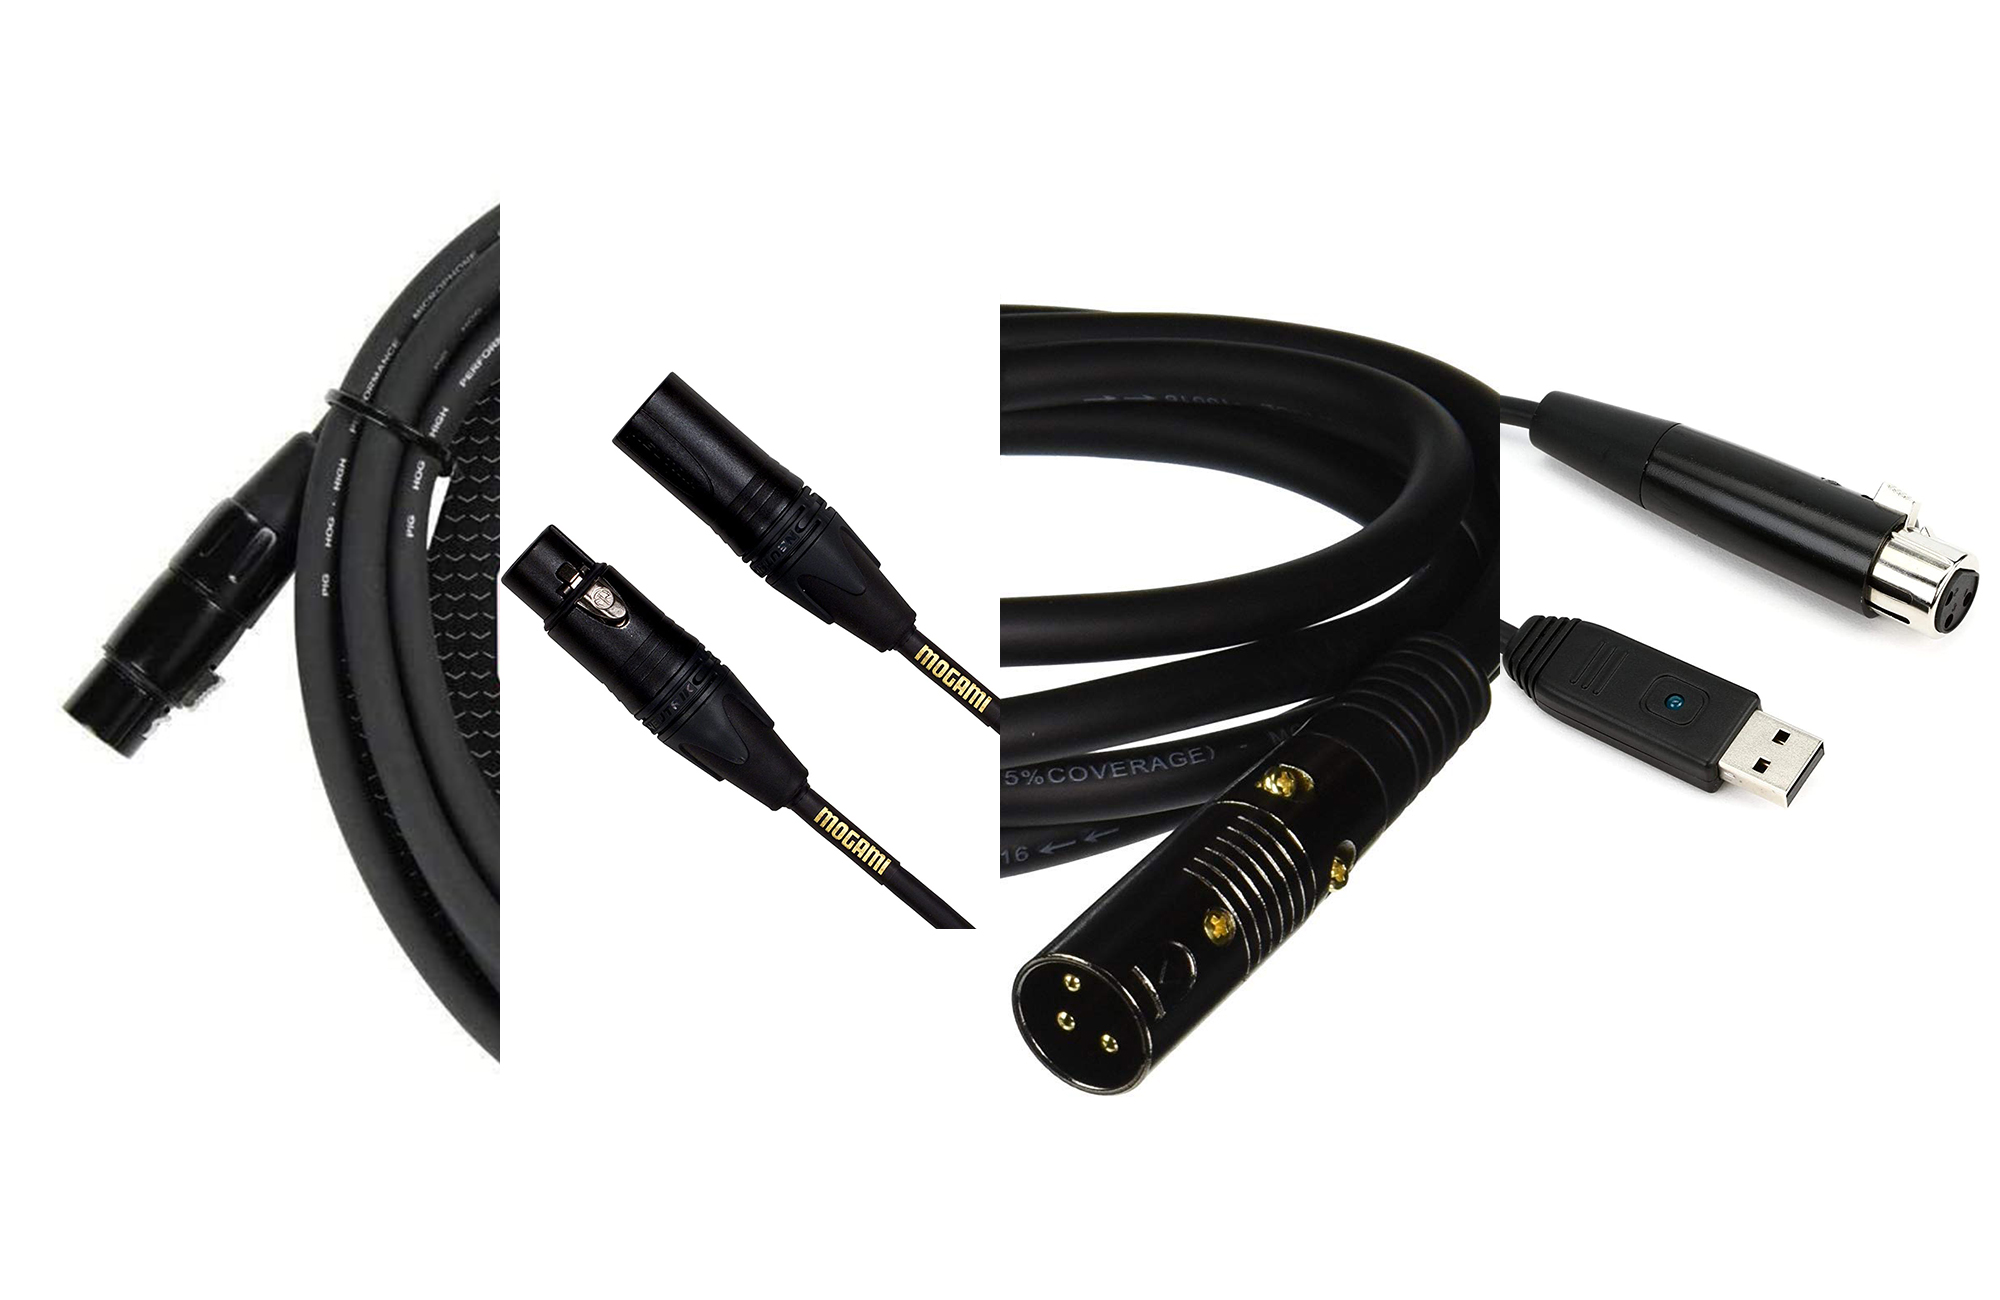 Audio Cables  Shop Our Huge Selection of Audio Cables, RCA Audio Cables,  Patch Cables, Speaker Cables, Microphone Cables, Instrument Cables, Audio  Extension Cables, Balanced and Unbalanced Cables and More